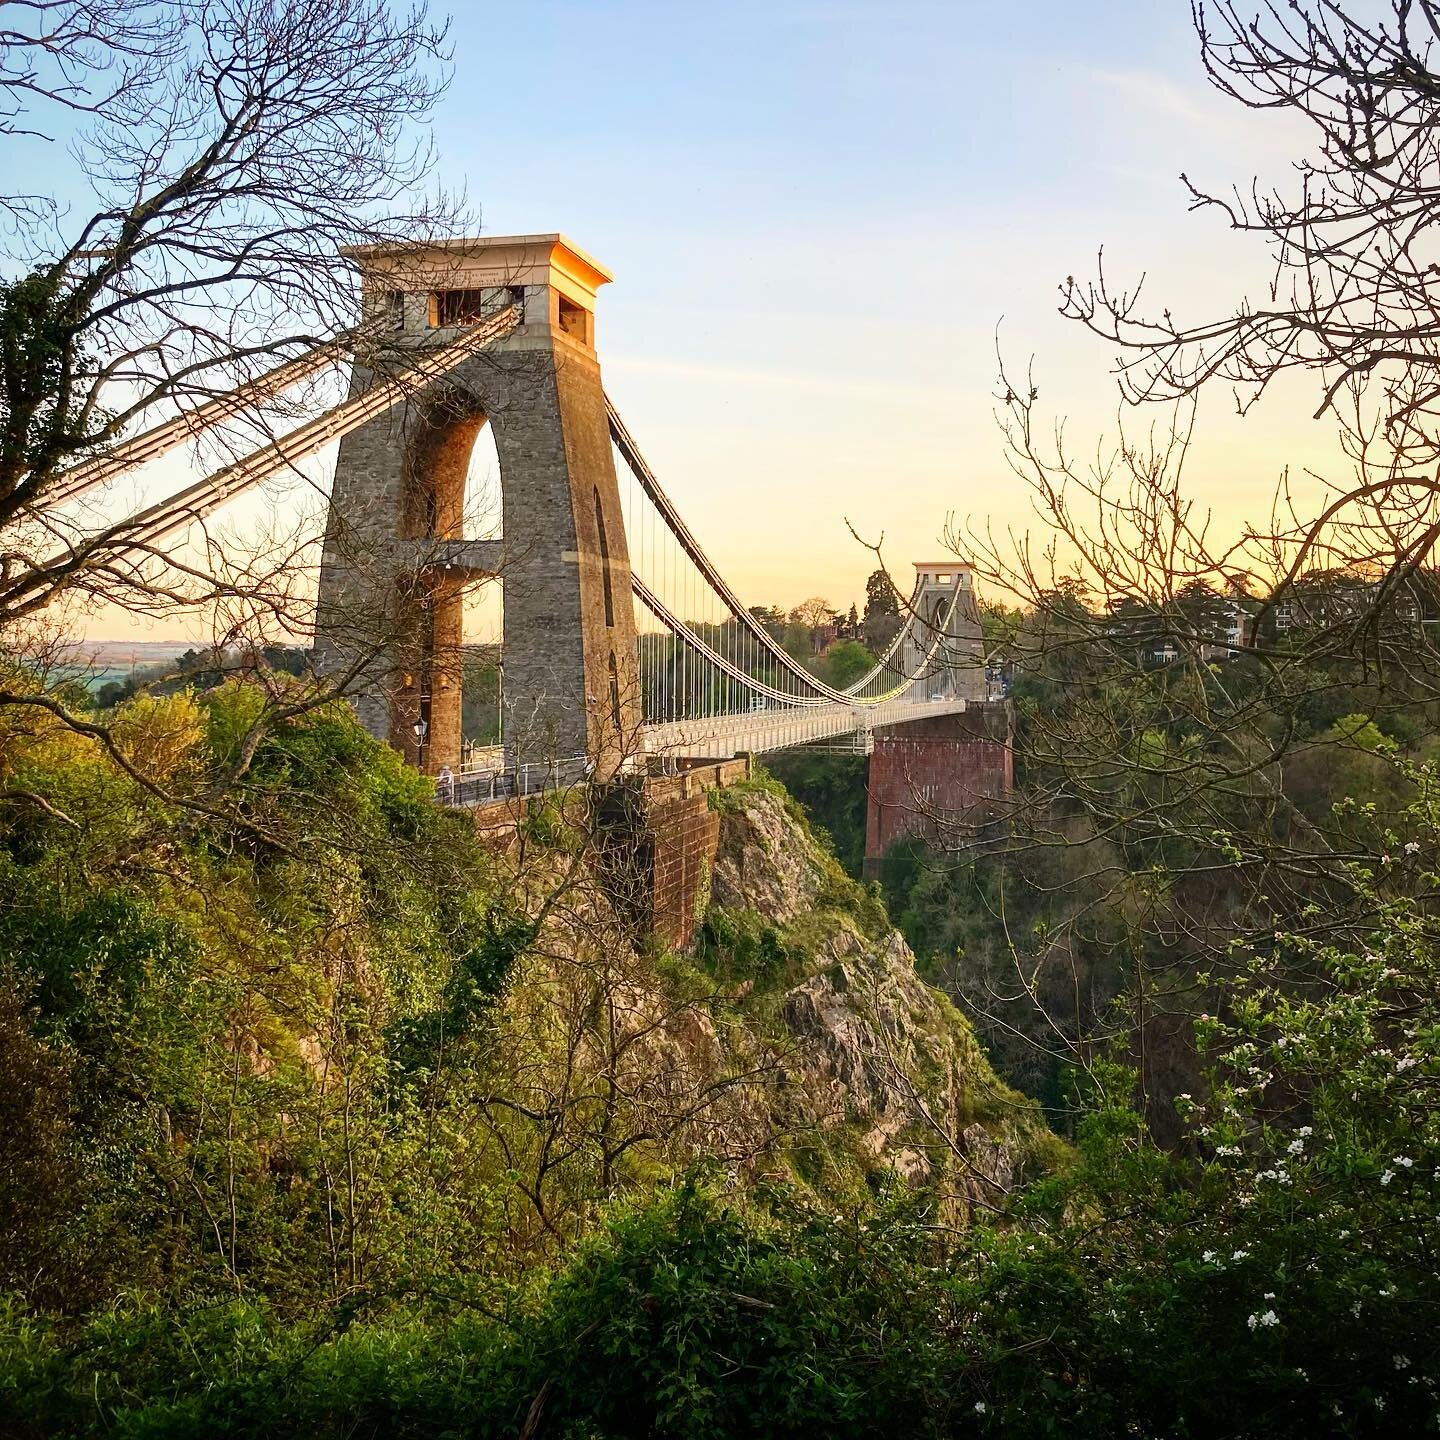 Two #sunsets in one walk. One at #bristol docks and the other at the #observatory with #gin and me great mate #Pete. This view of the bridge always seems perfect.